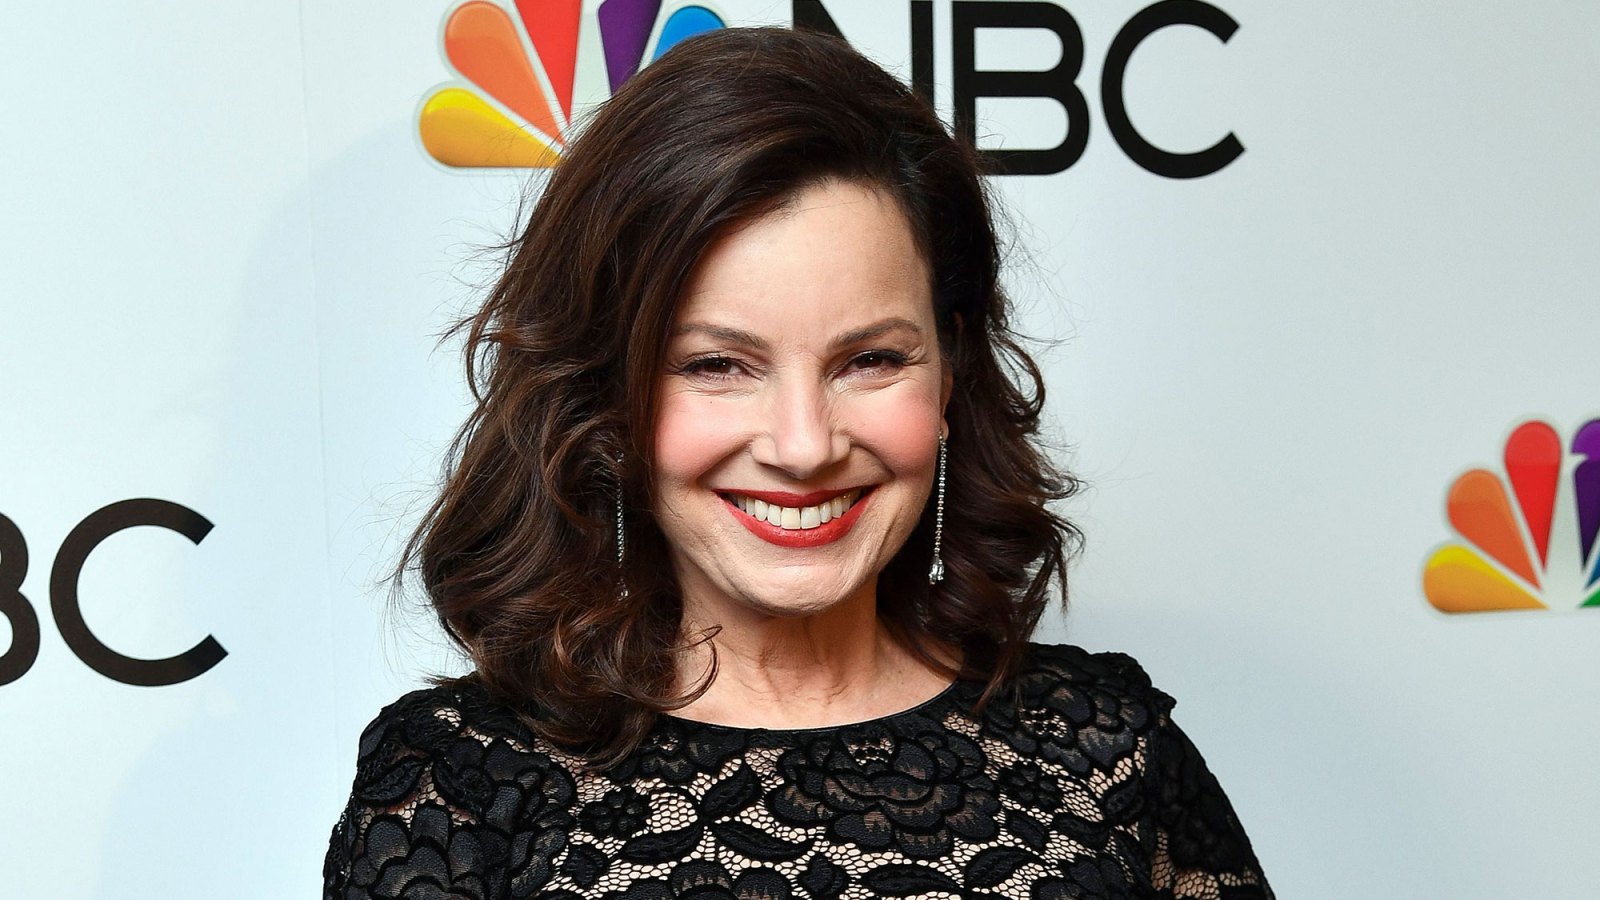 Fran Drescher Spills The Gospel Fashion Tip She Learned From The Nanny The Pantyhose Held Up My Cheeks